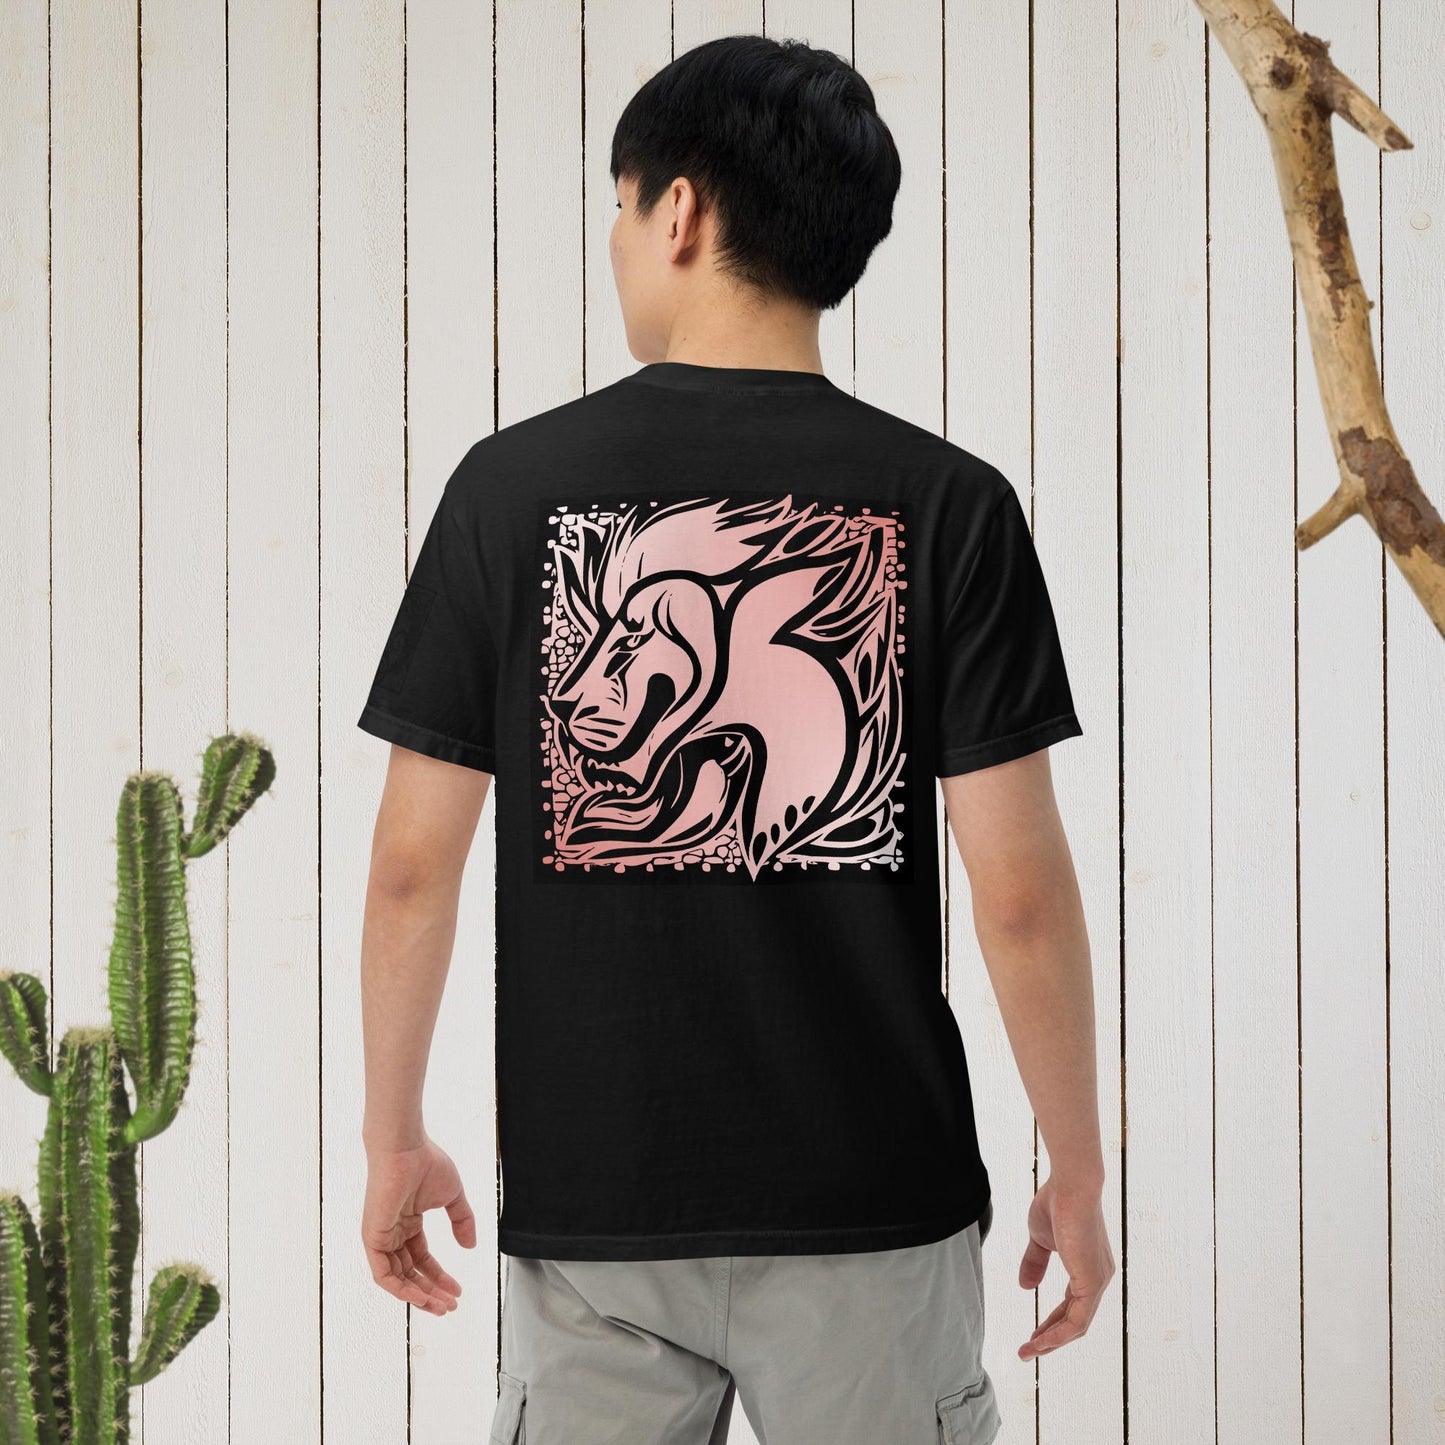 The Dominant Lion DISC Themed T-Shirt - Christian DISC®